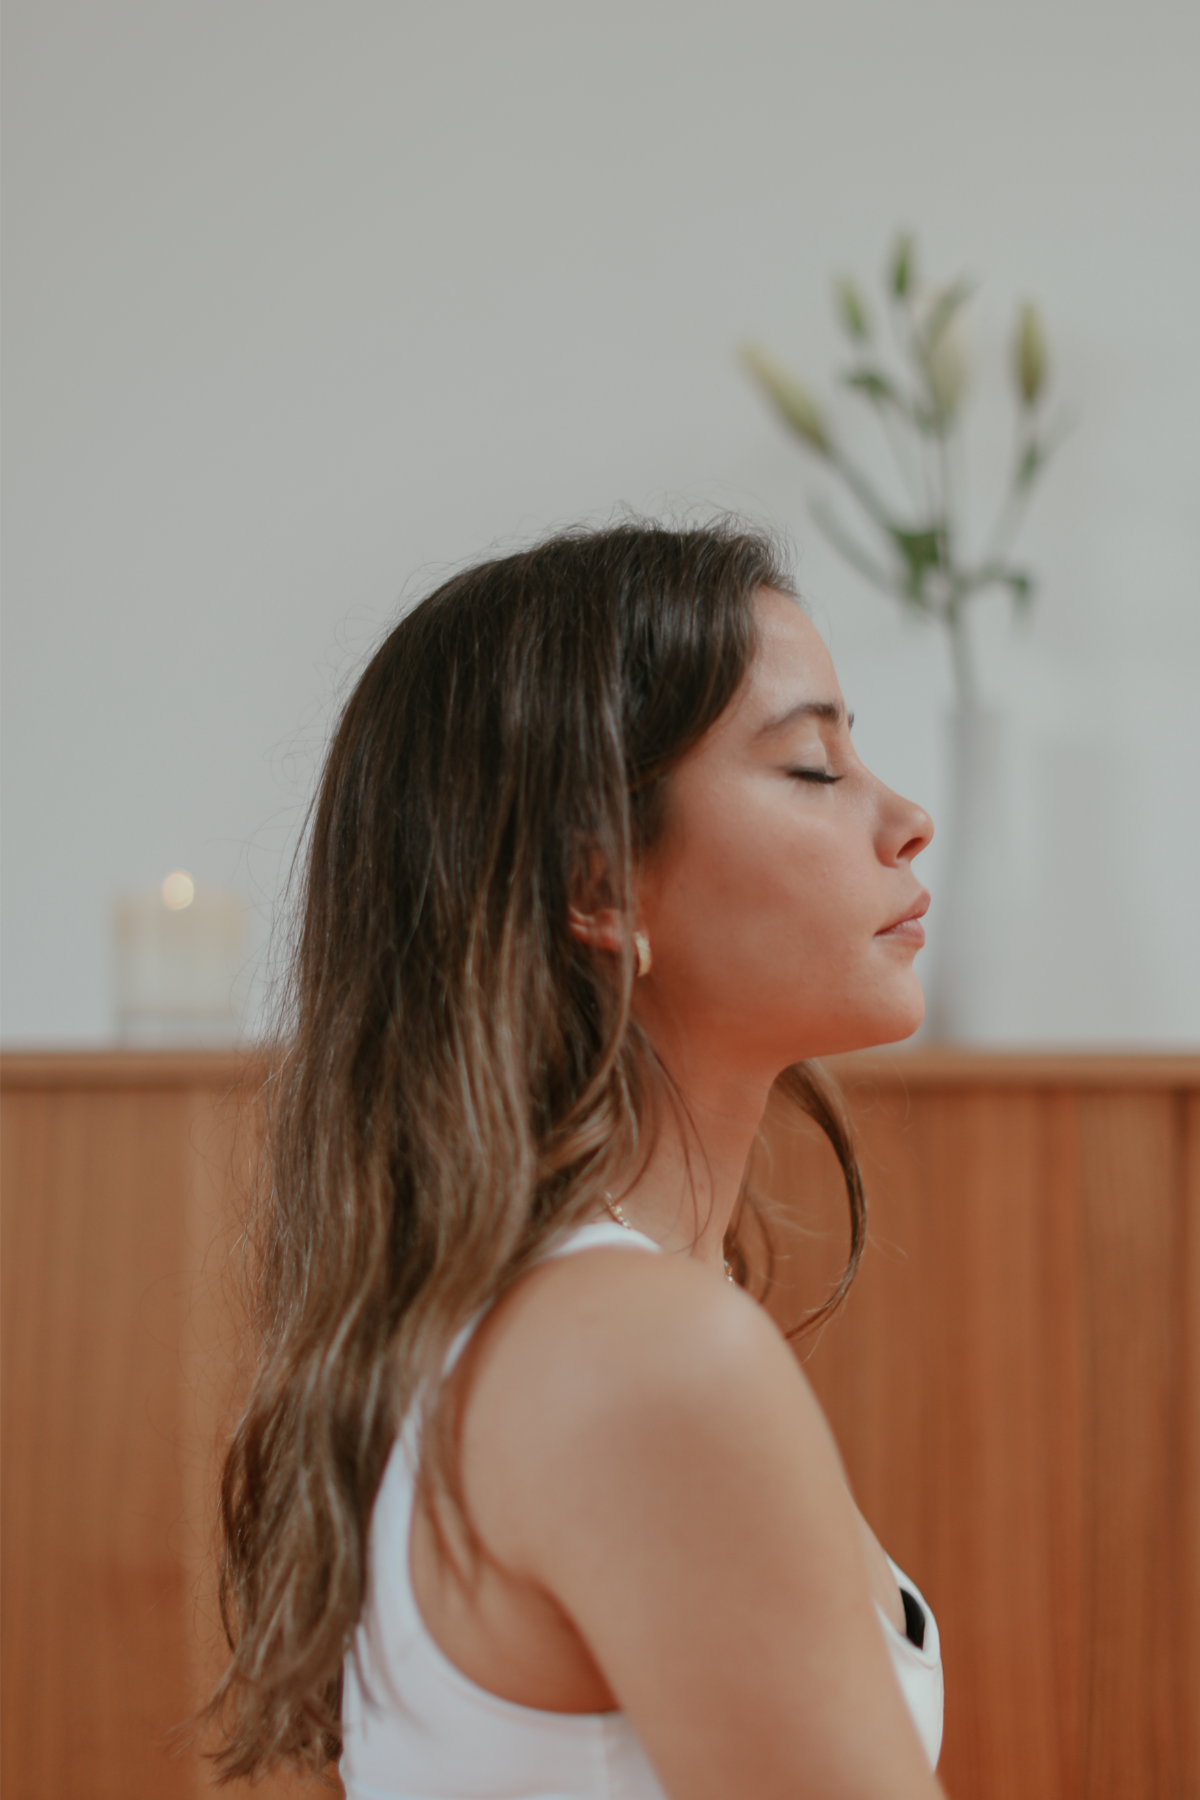 A woman closes her eyes while listening to her surroundings. This could symbolize the peace that mindfulness can bring. Learn tips for mental wellness in North Carolina and how therapy for anxiety in New Bern, NC can offer support this holiday season. 